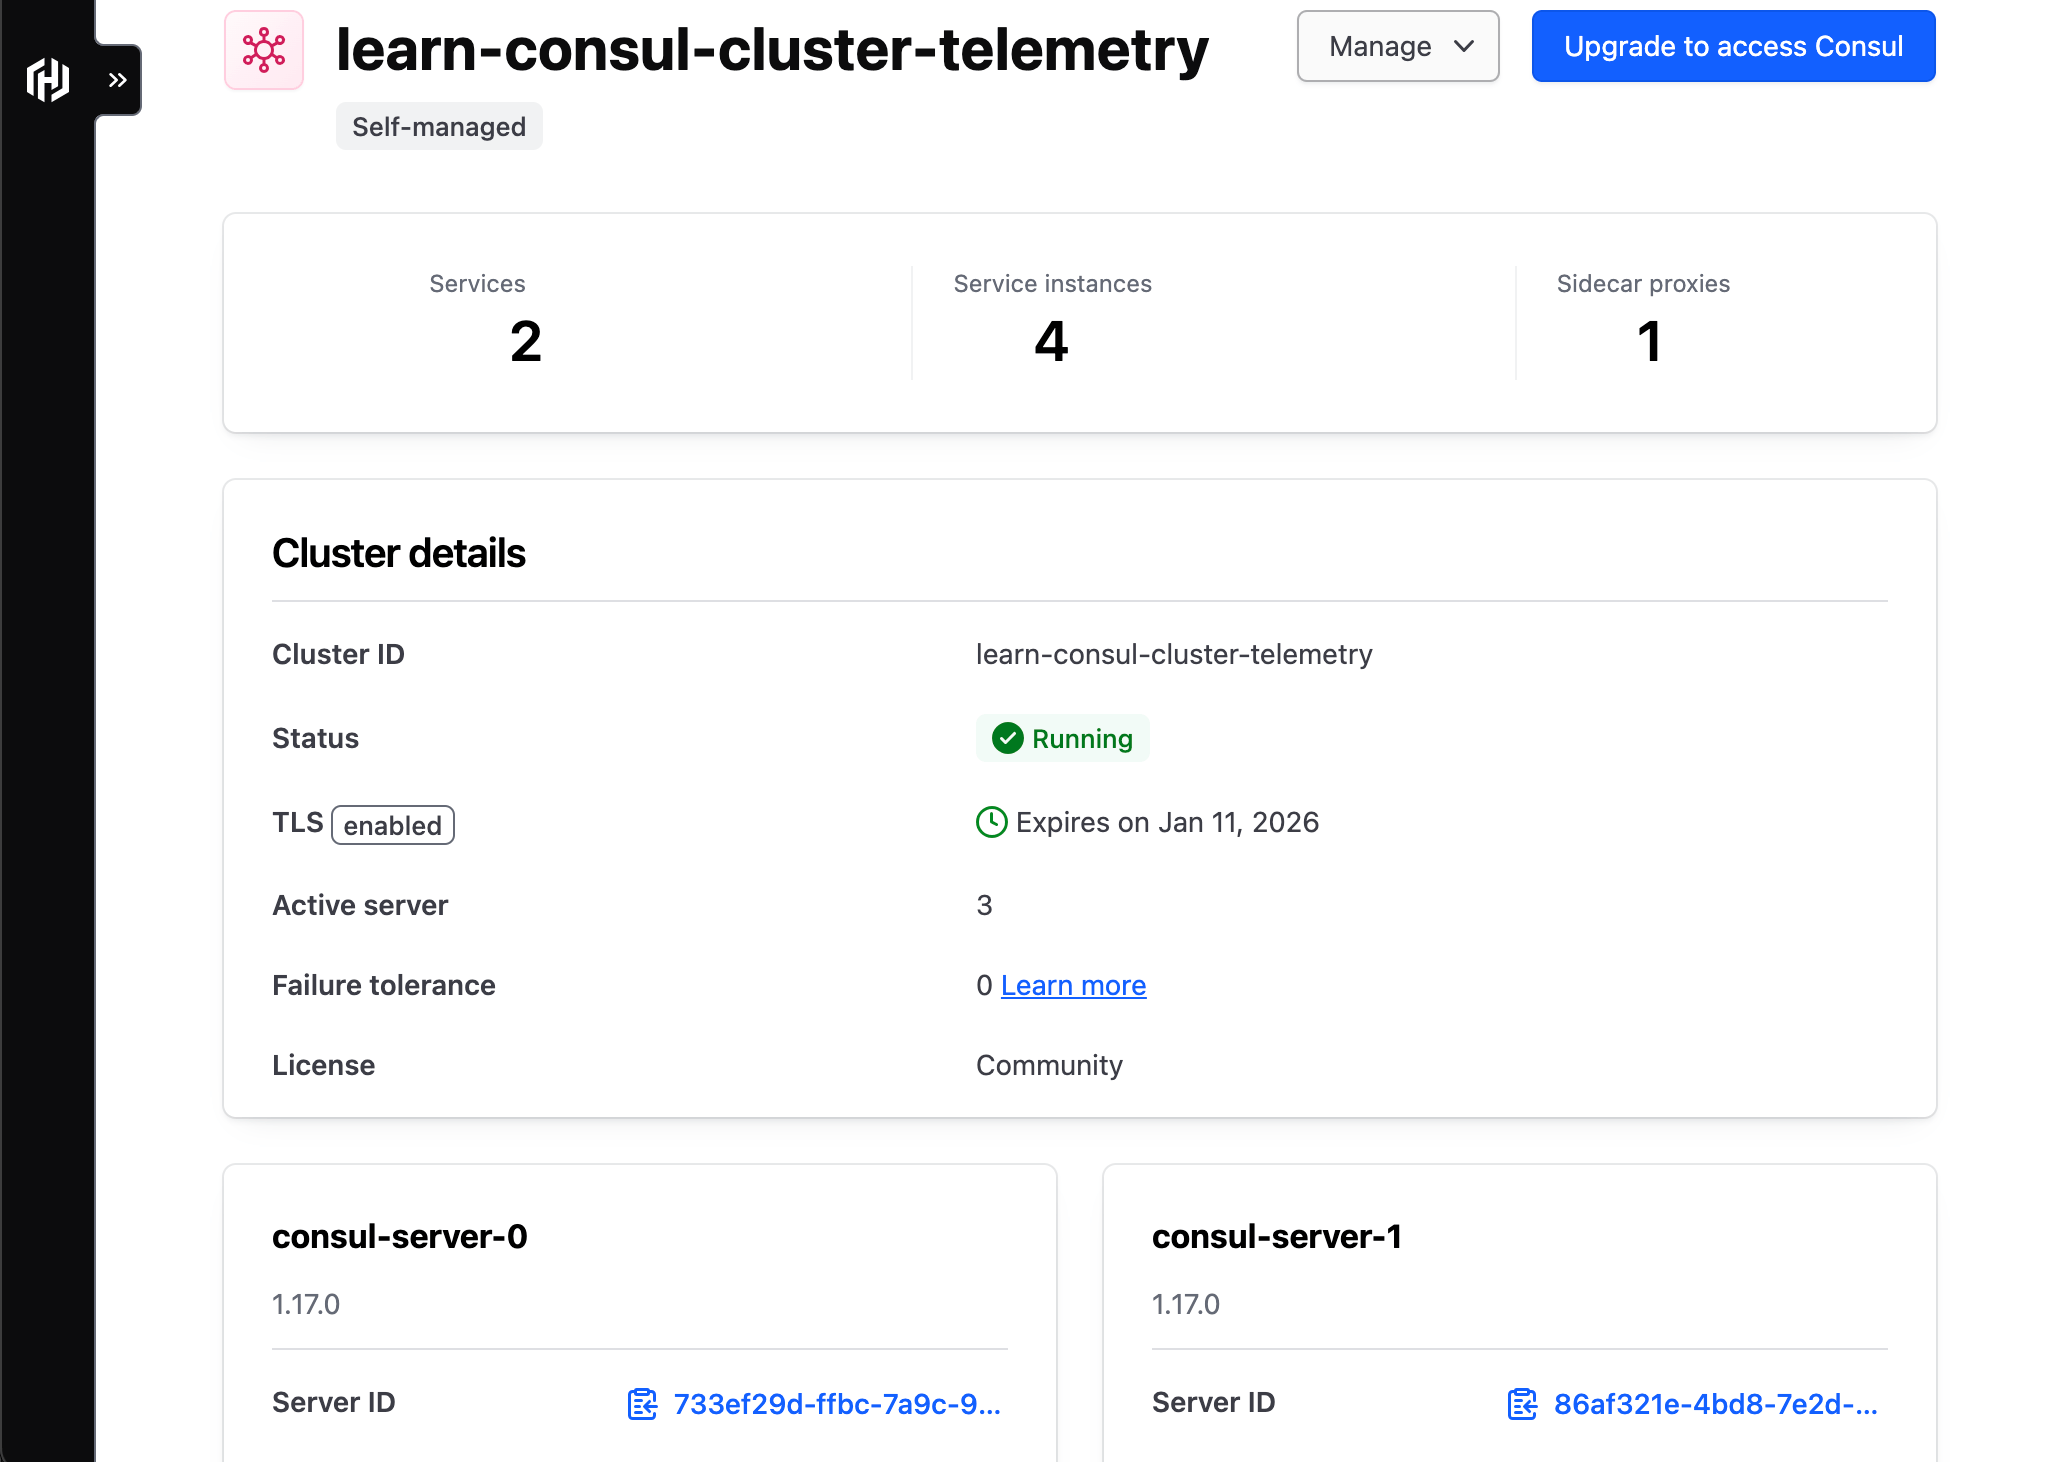 The cluster details page of the linked self-managed Consul cluster.